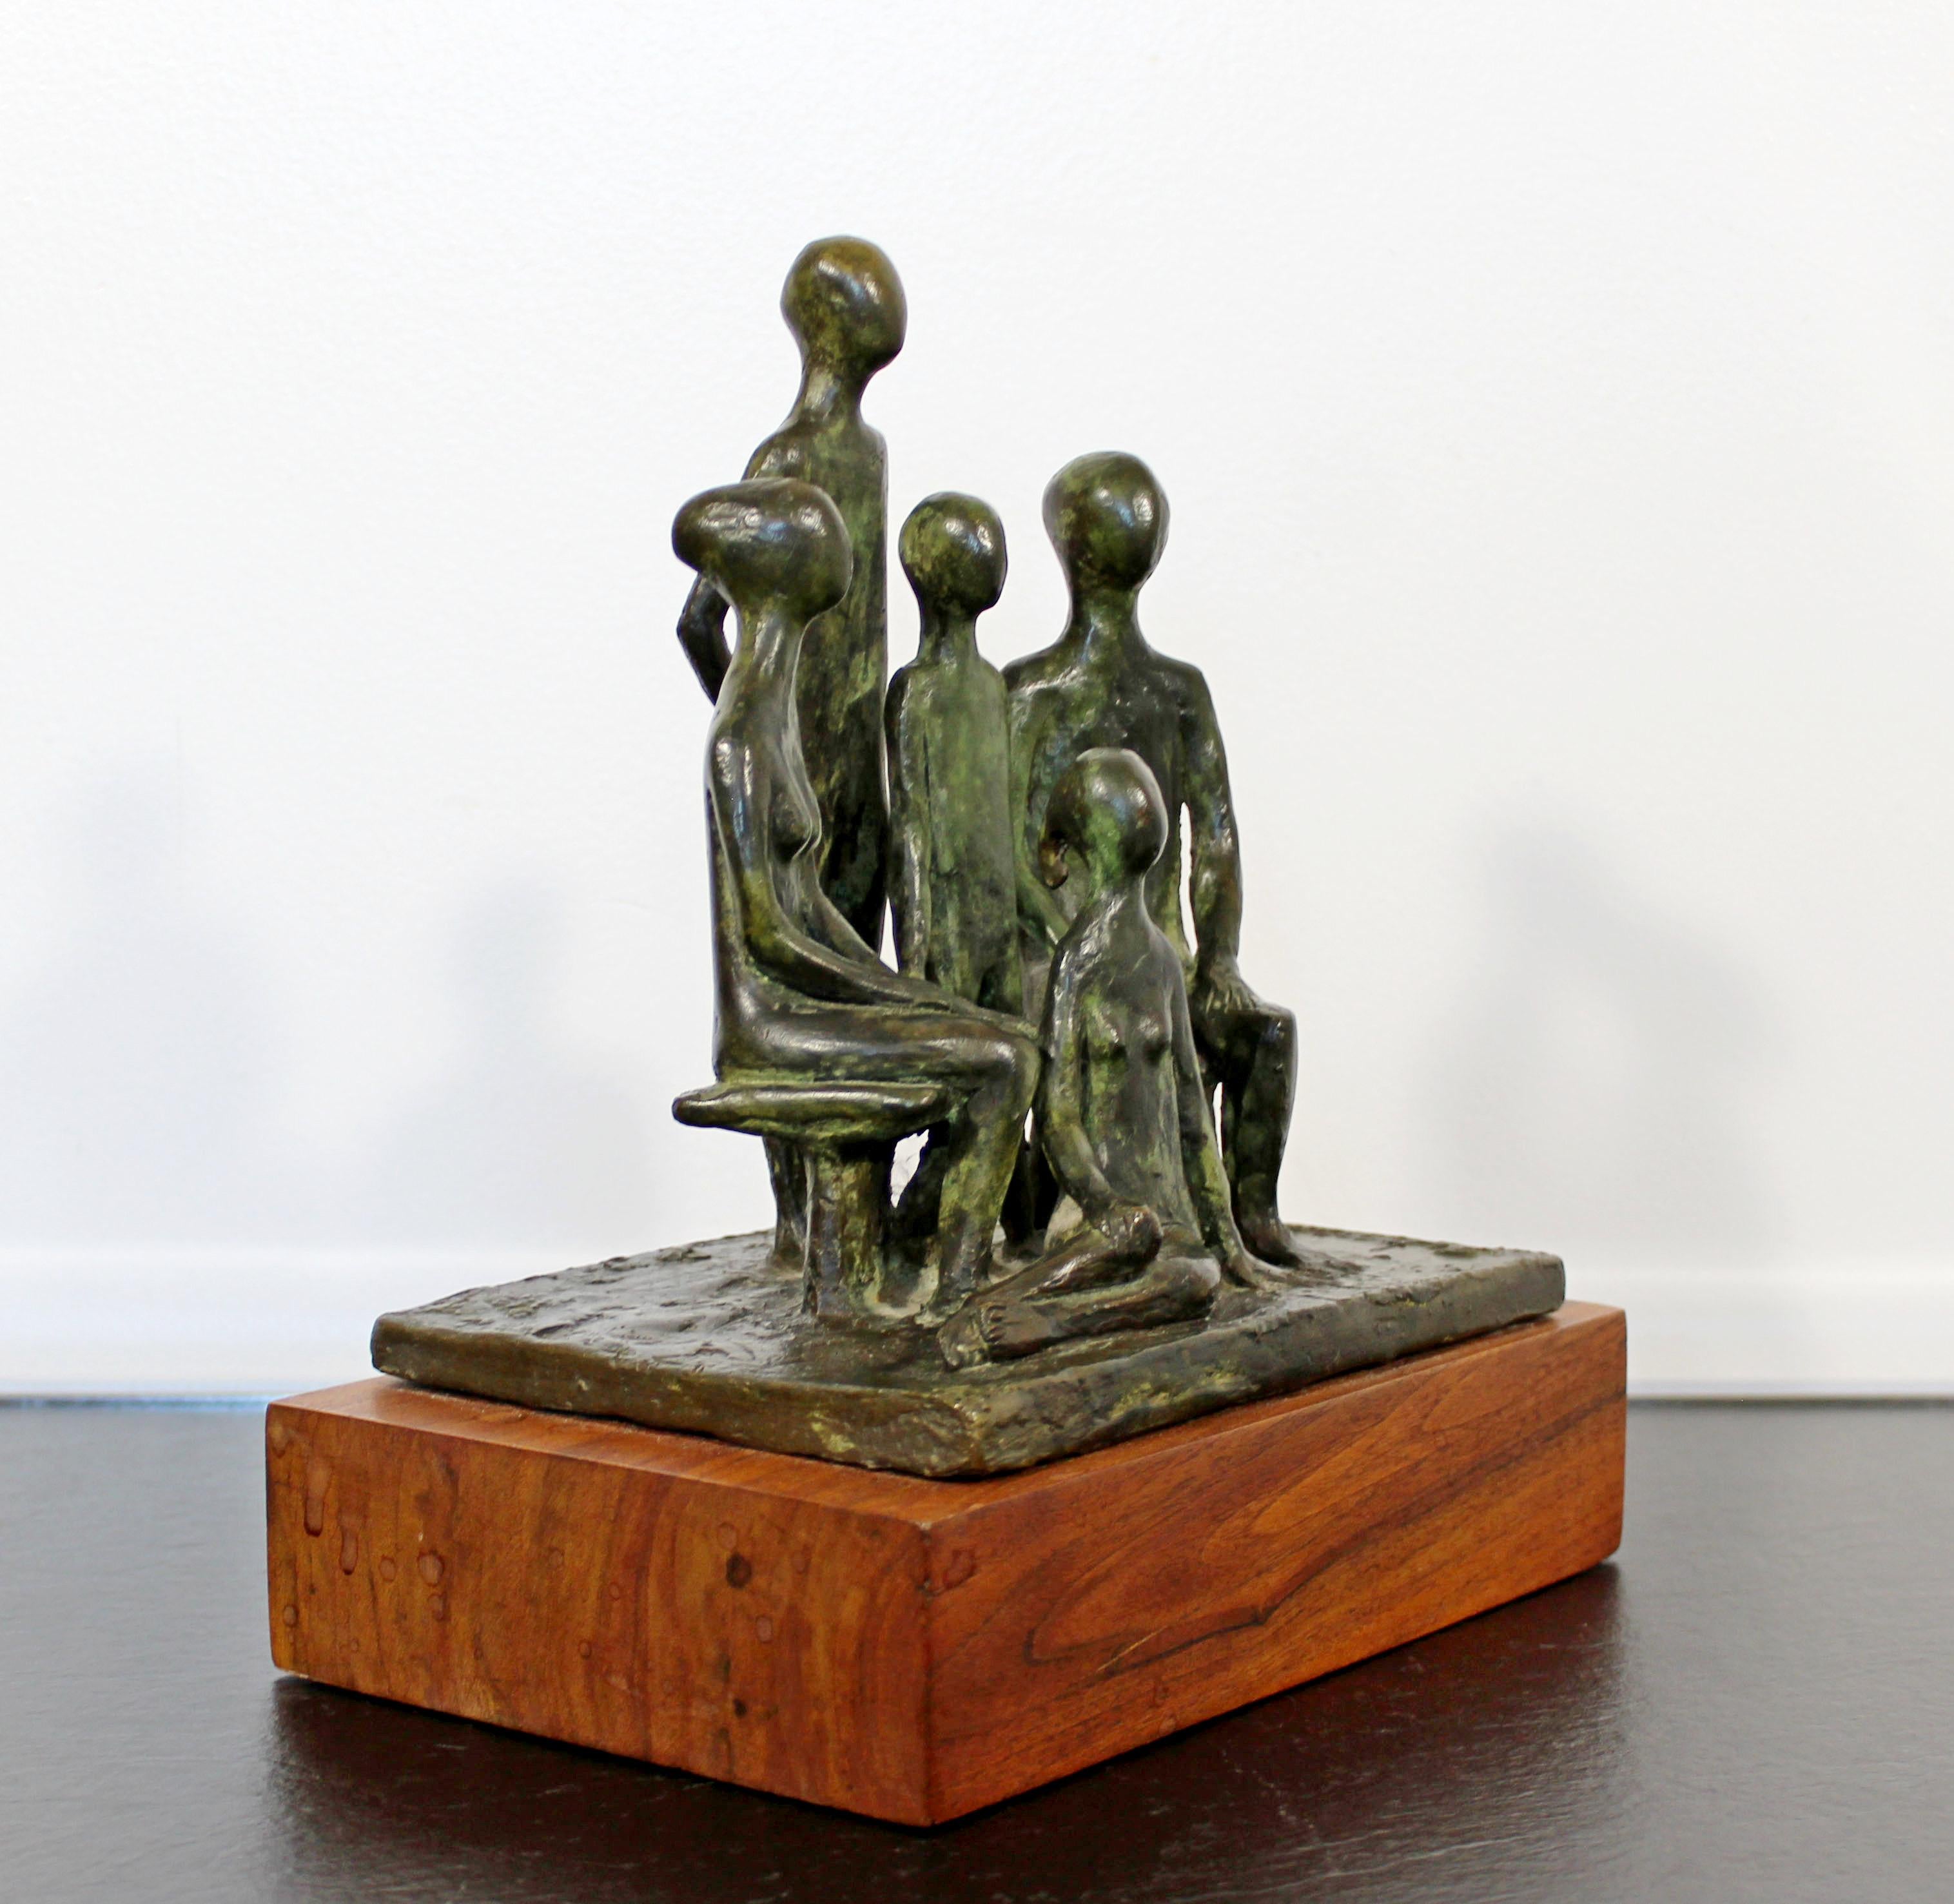 For your consideration is a wonderful sculpture of a family, made of bronze on a wood base, signed by Arthur Schneider, circa the 1970s. In excellent condition. The dimensions are 8.5